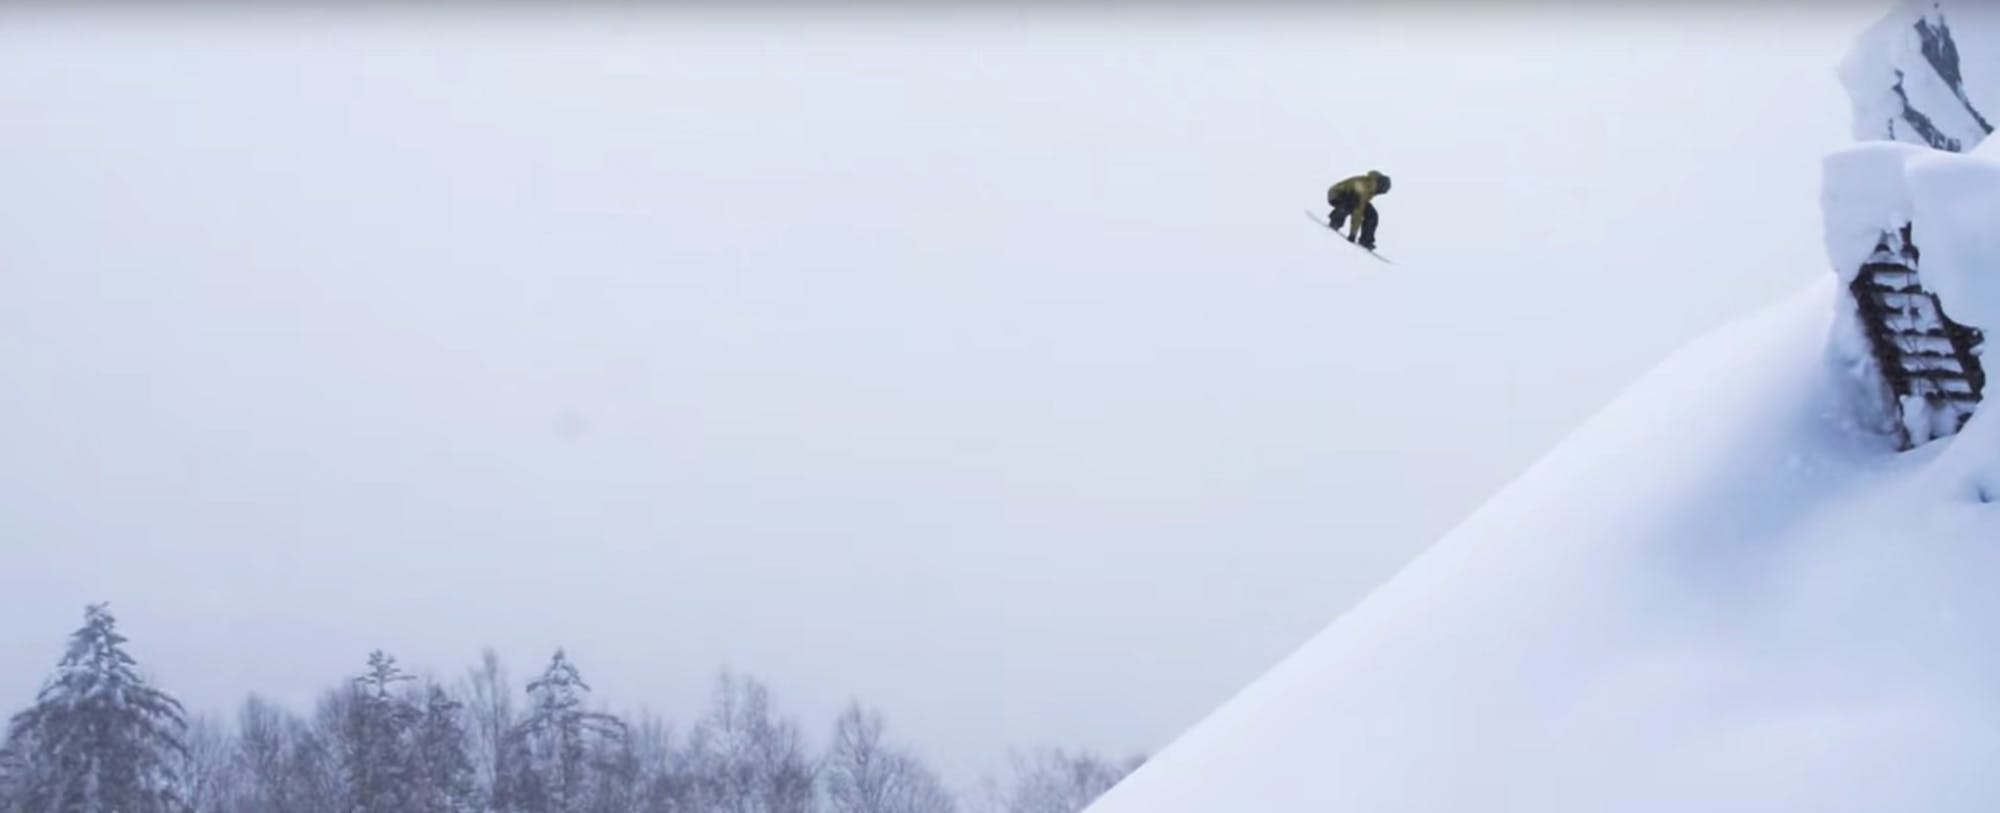 Bento: Snowboarding at its Deepest in Japan